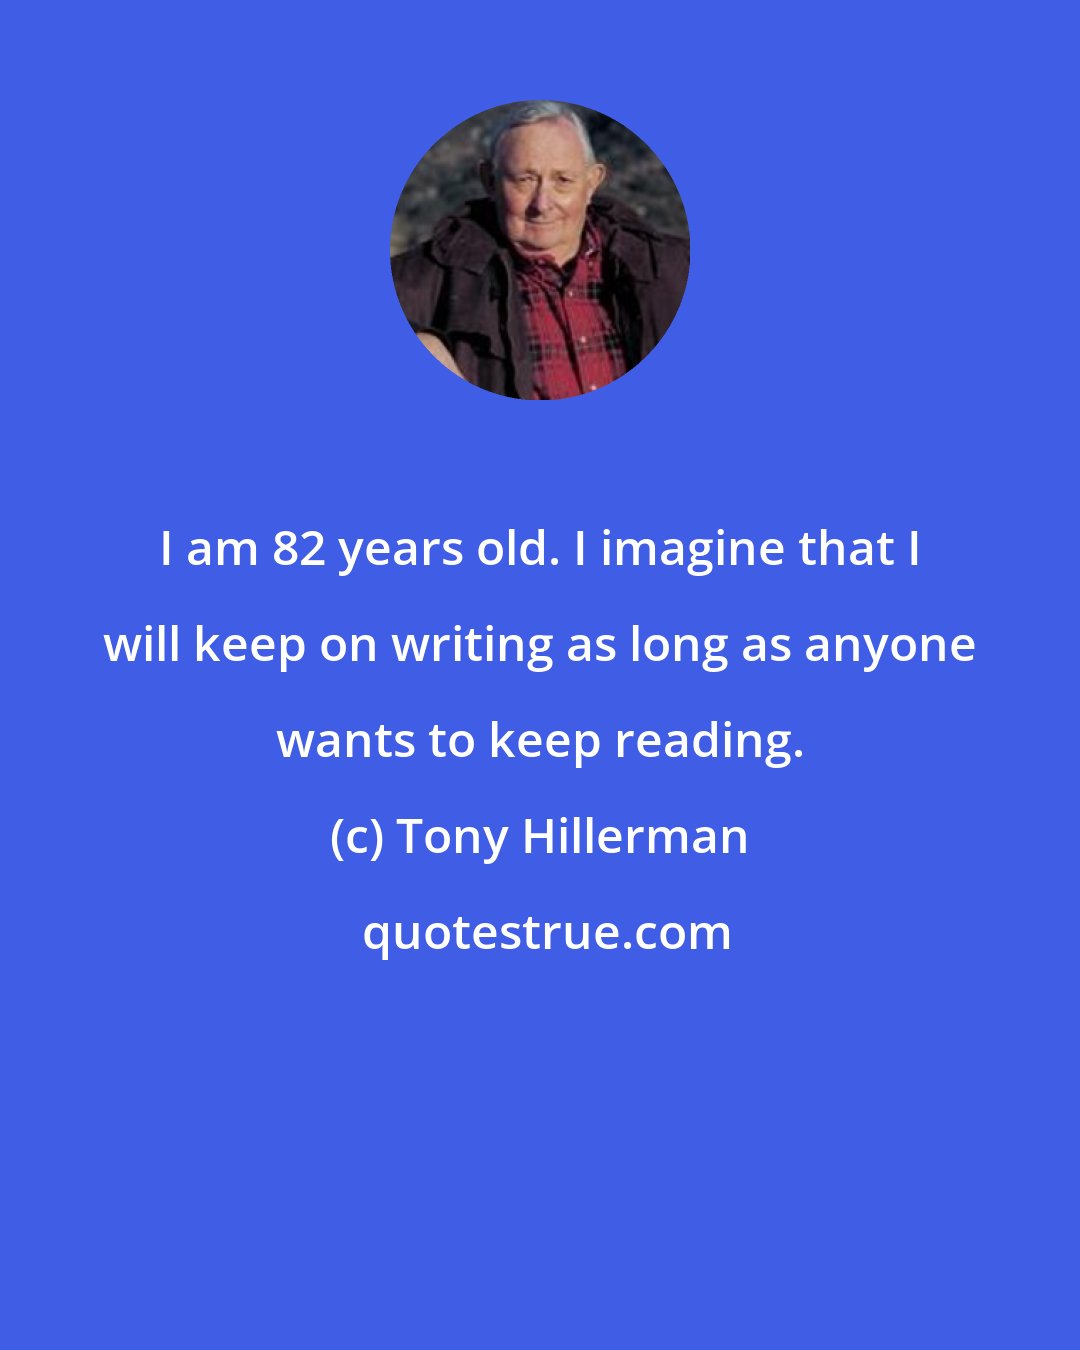 Tony Hillerman: I am 82 years old. I imagine that I will keep on writing as long as anyone wants to keep reading.